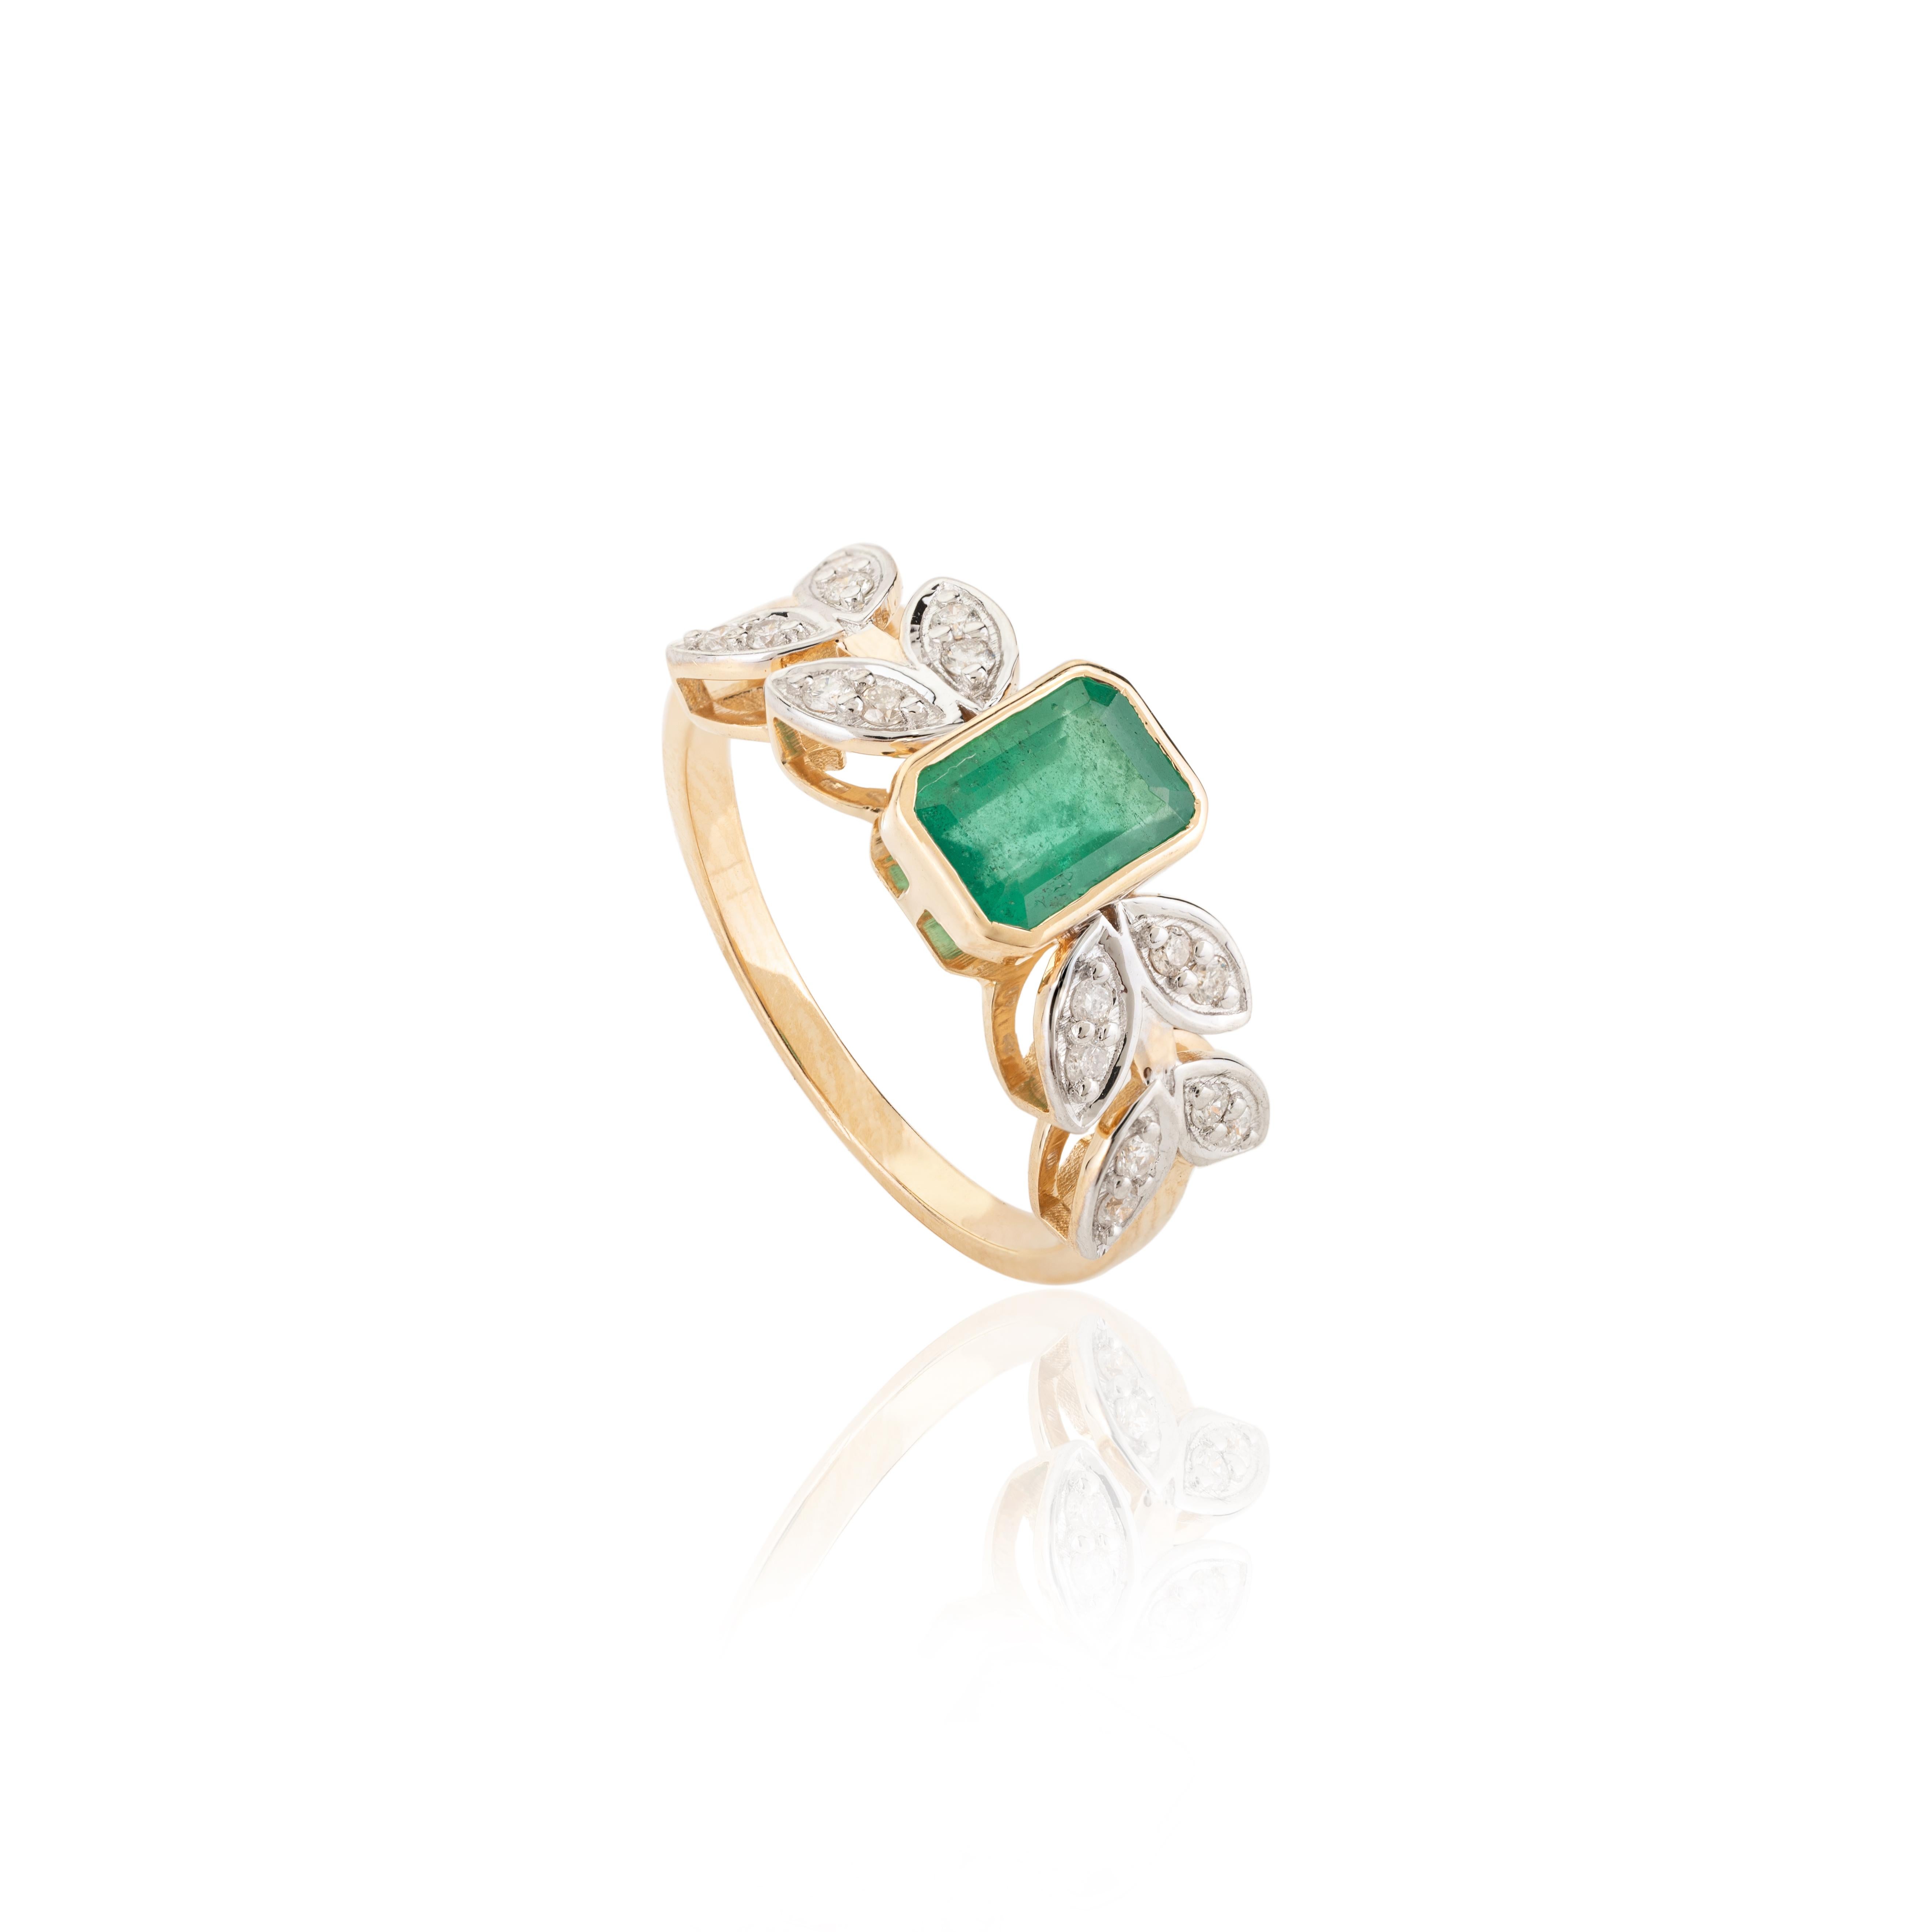 For Sale:  Natural Emerald and Diamond Floral Motif Band Ring in 18k Solid Yellow Gold 7